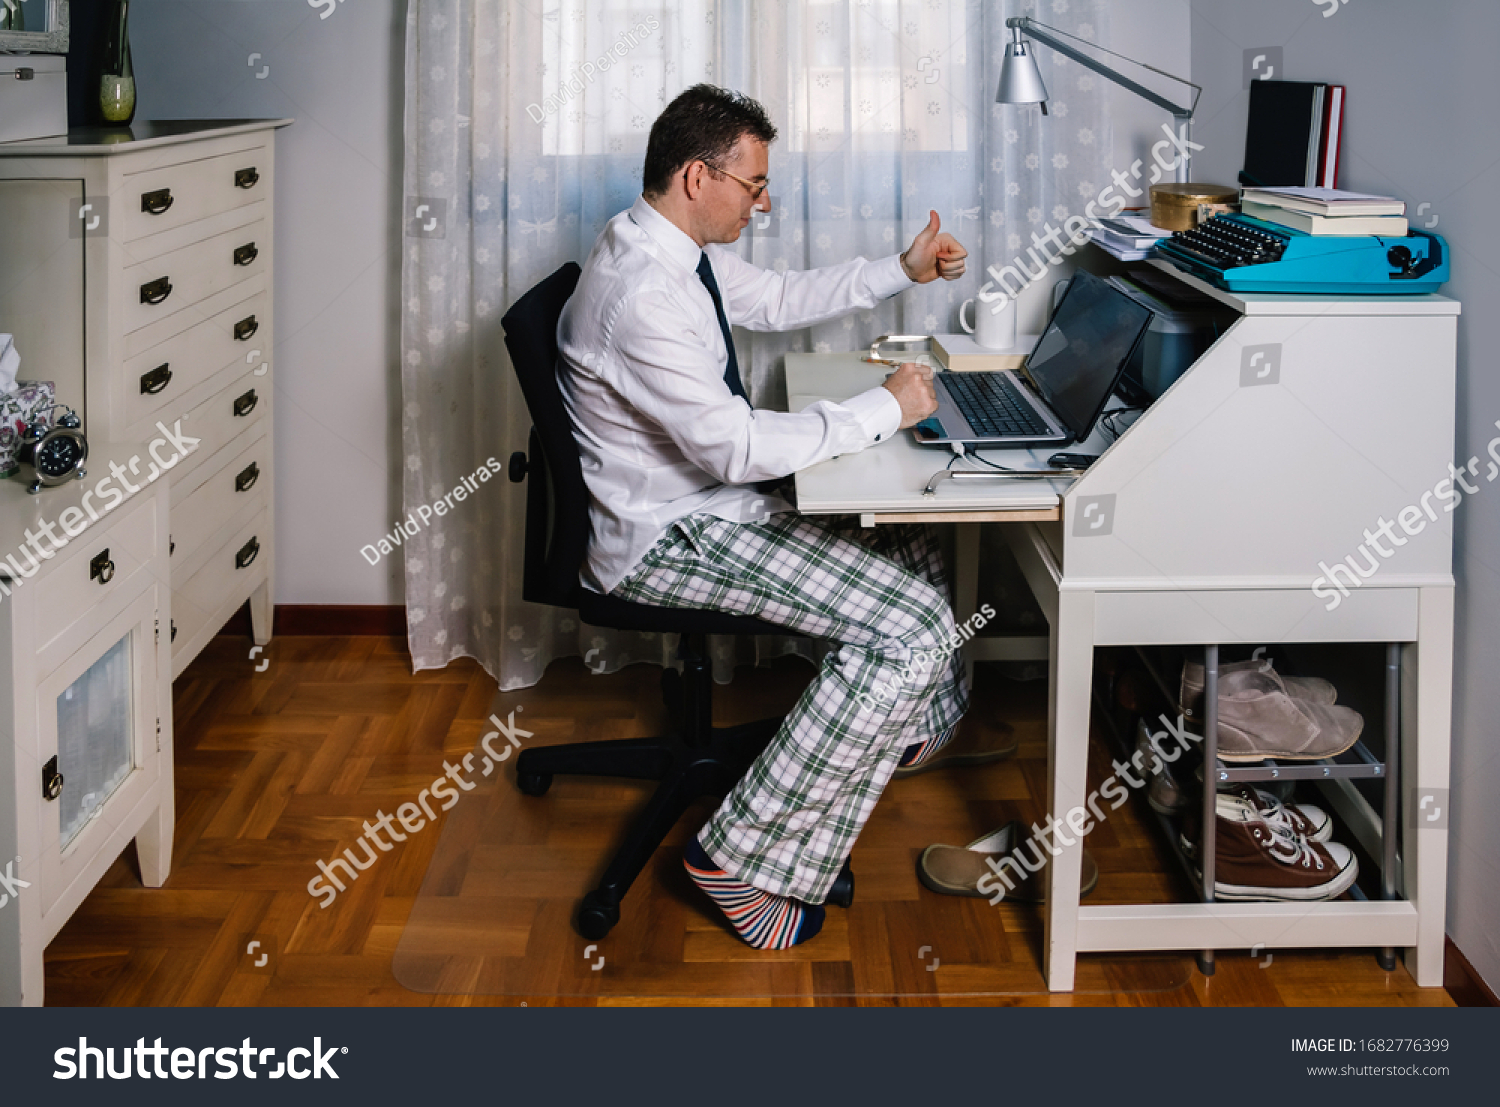 Man working from home with laptop wearing shirt, tie and pajama pants #1682776399